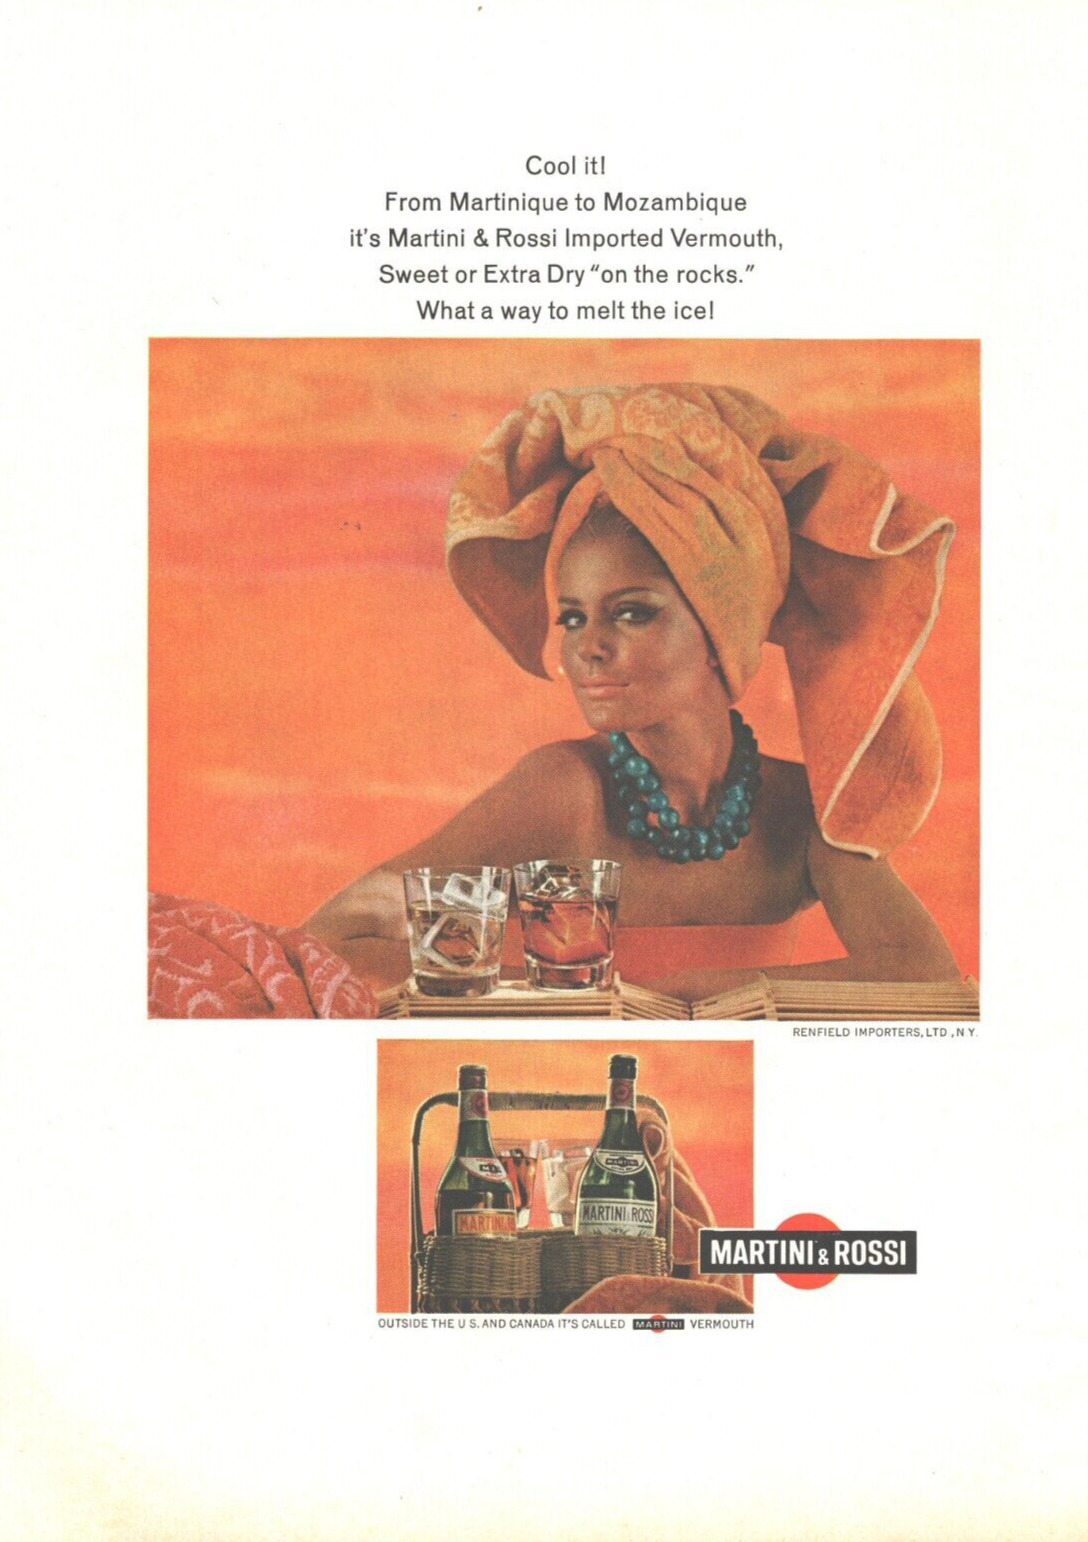 1966 Martini & Rossi Imported Vermouth Vintage Print Ad Lady Towel On Head